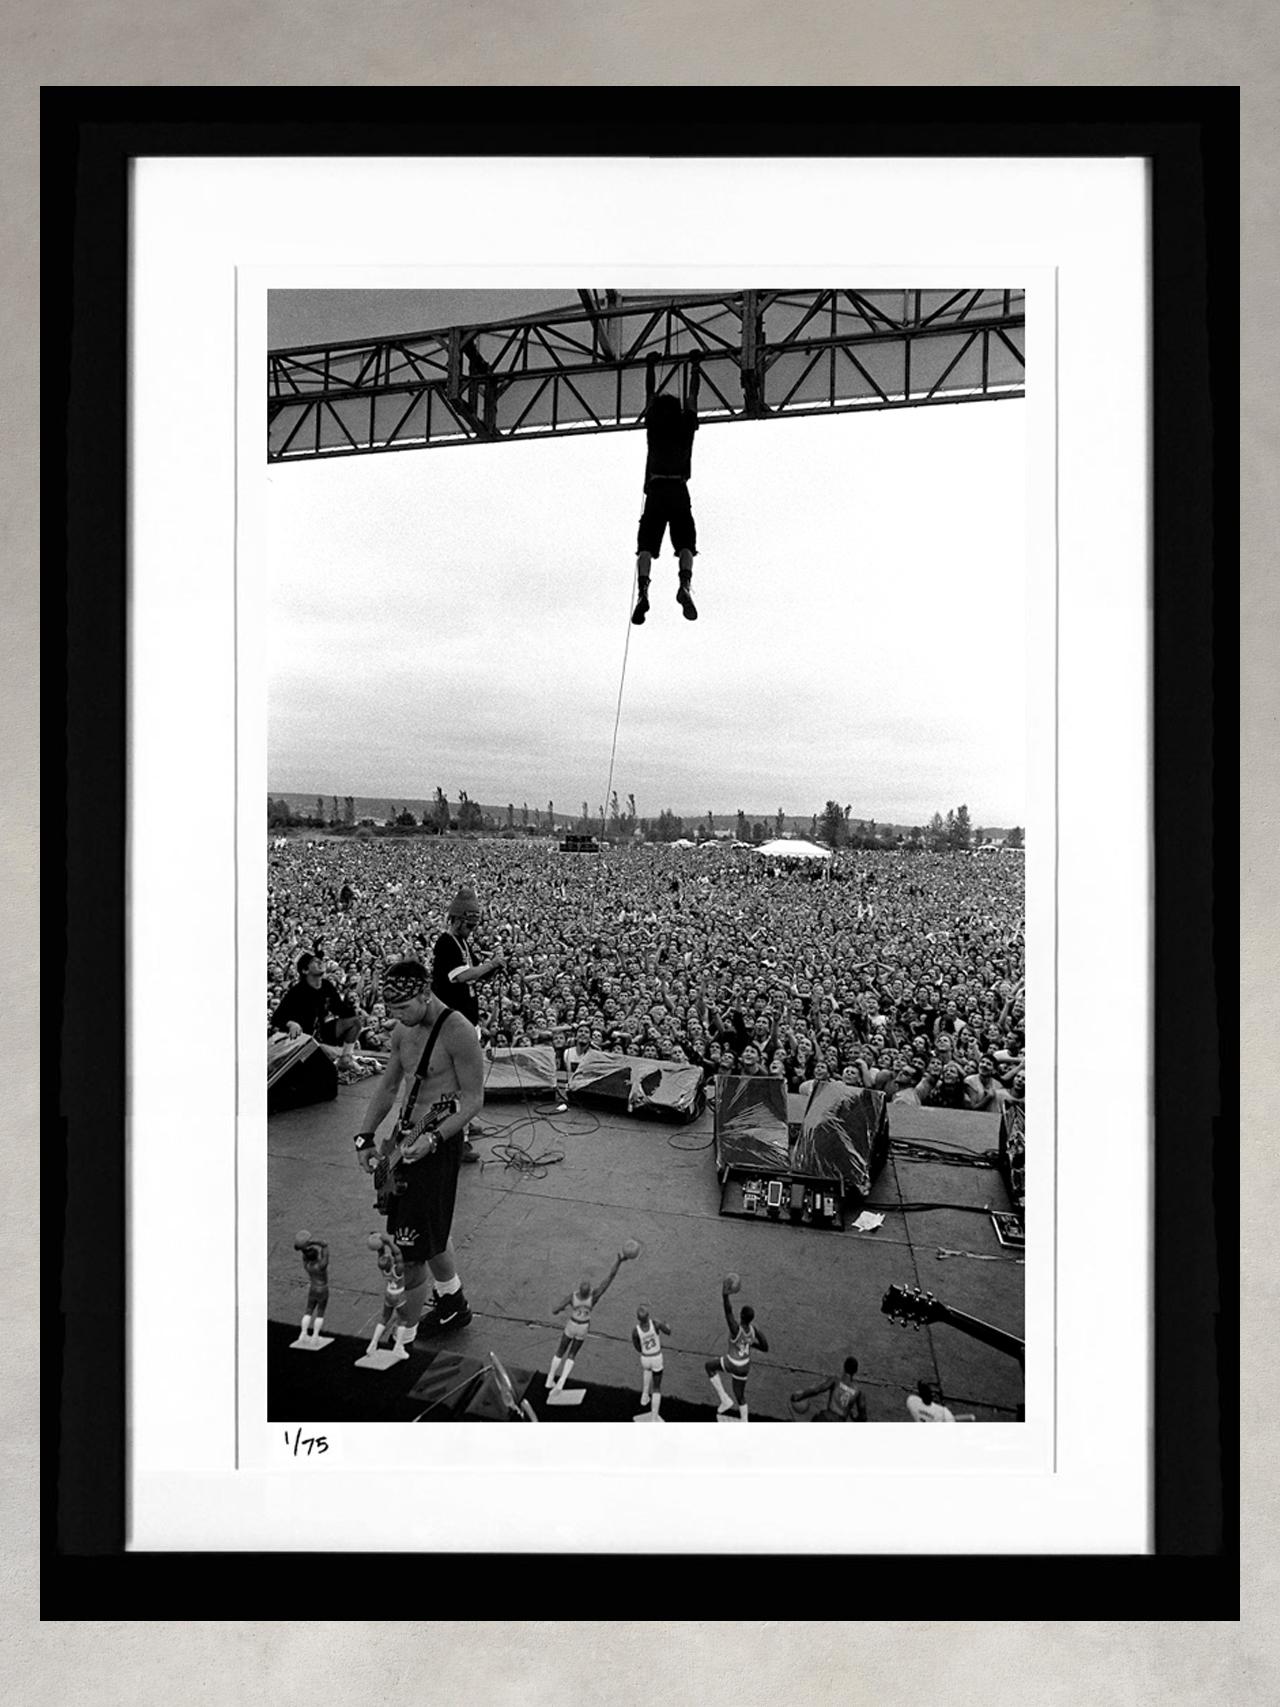 Pearl Jam by Lance Mercer image number 1